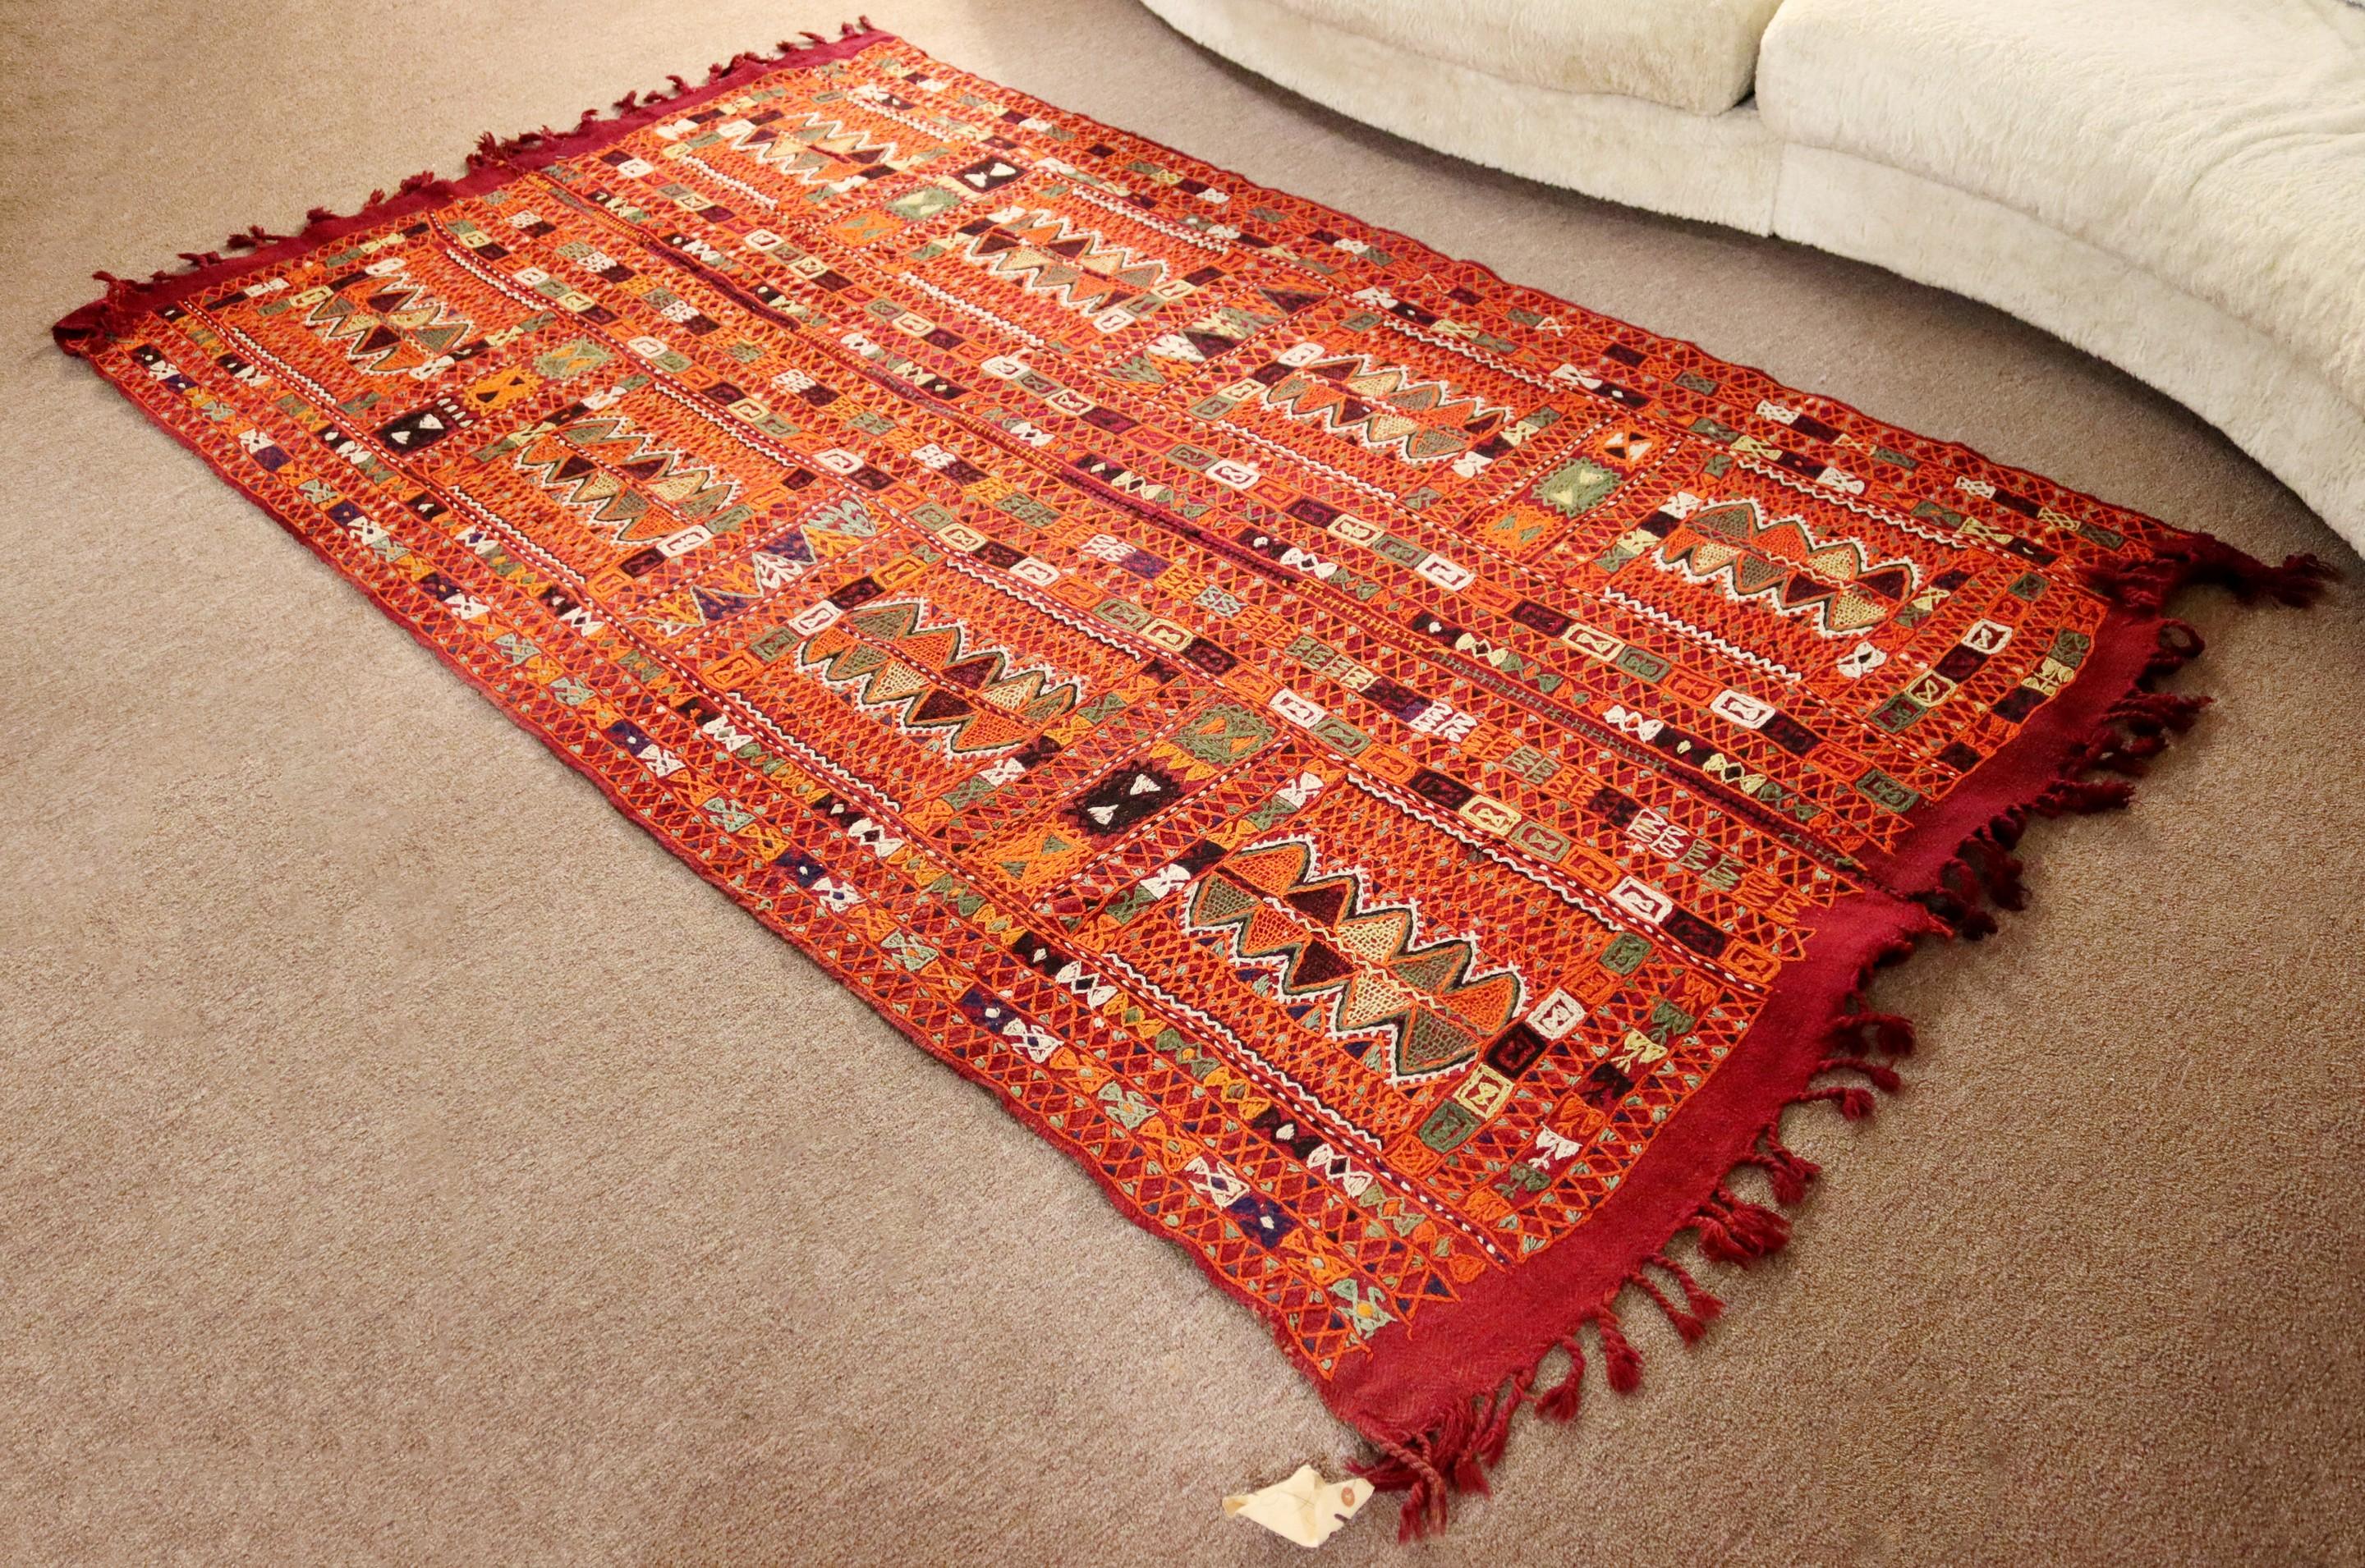 For your consideration is a stellar, Samawa style, rectangular area rug or carpet, made in Iraq. In excellent condition. The dimensions are 102